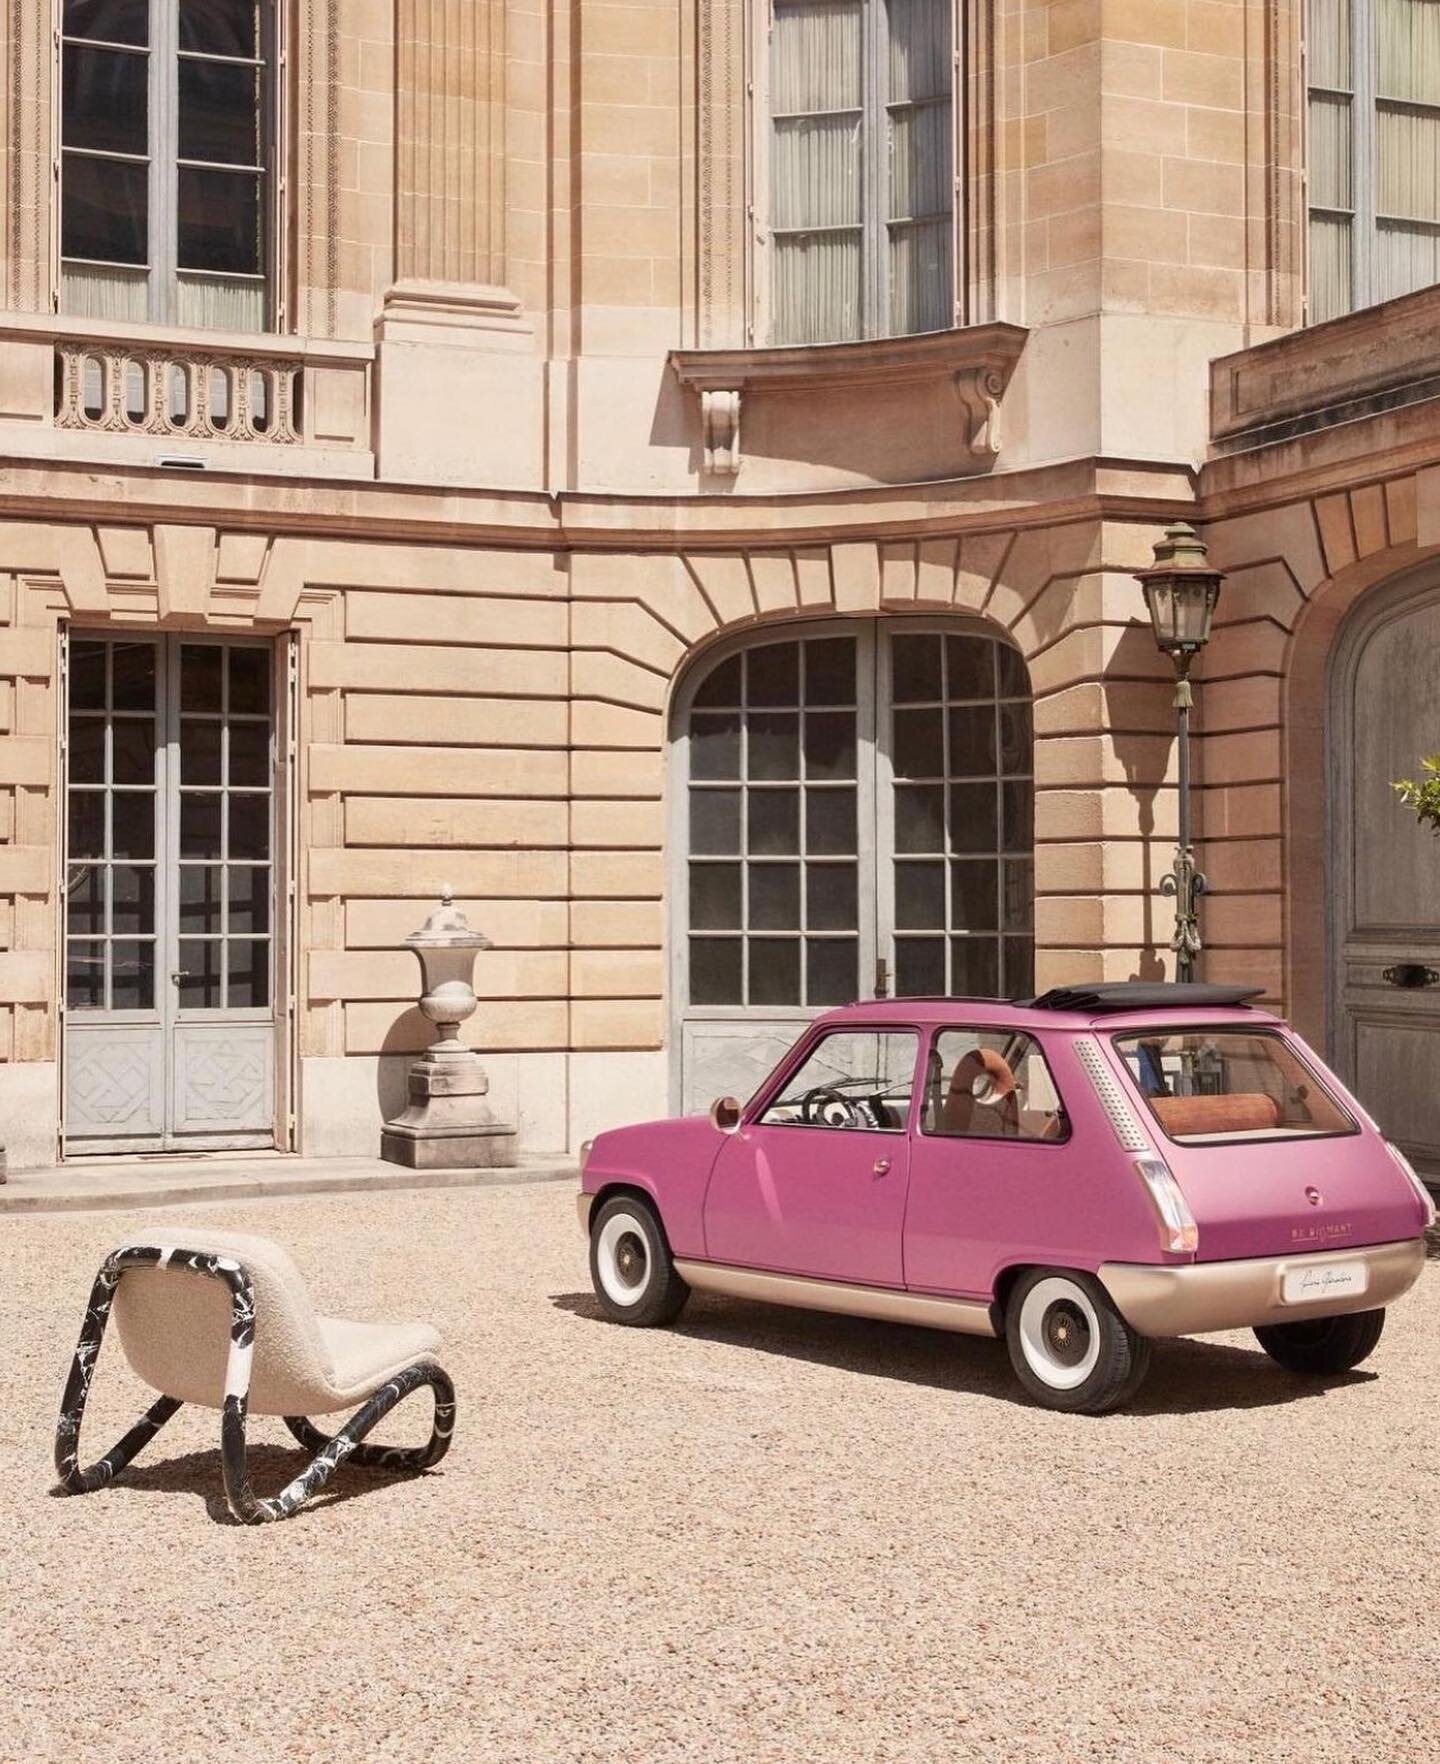 2022 marks the 50th anniversary of one the brand&rsquo;s icons, Renault 5. True symbol of the pop-culture, more than 5 million units of the model were sold in several countries between 1972 and 1984. Today it is a new collaboration between Renault an